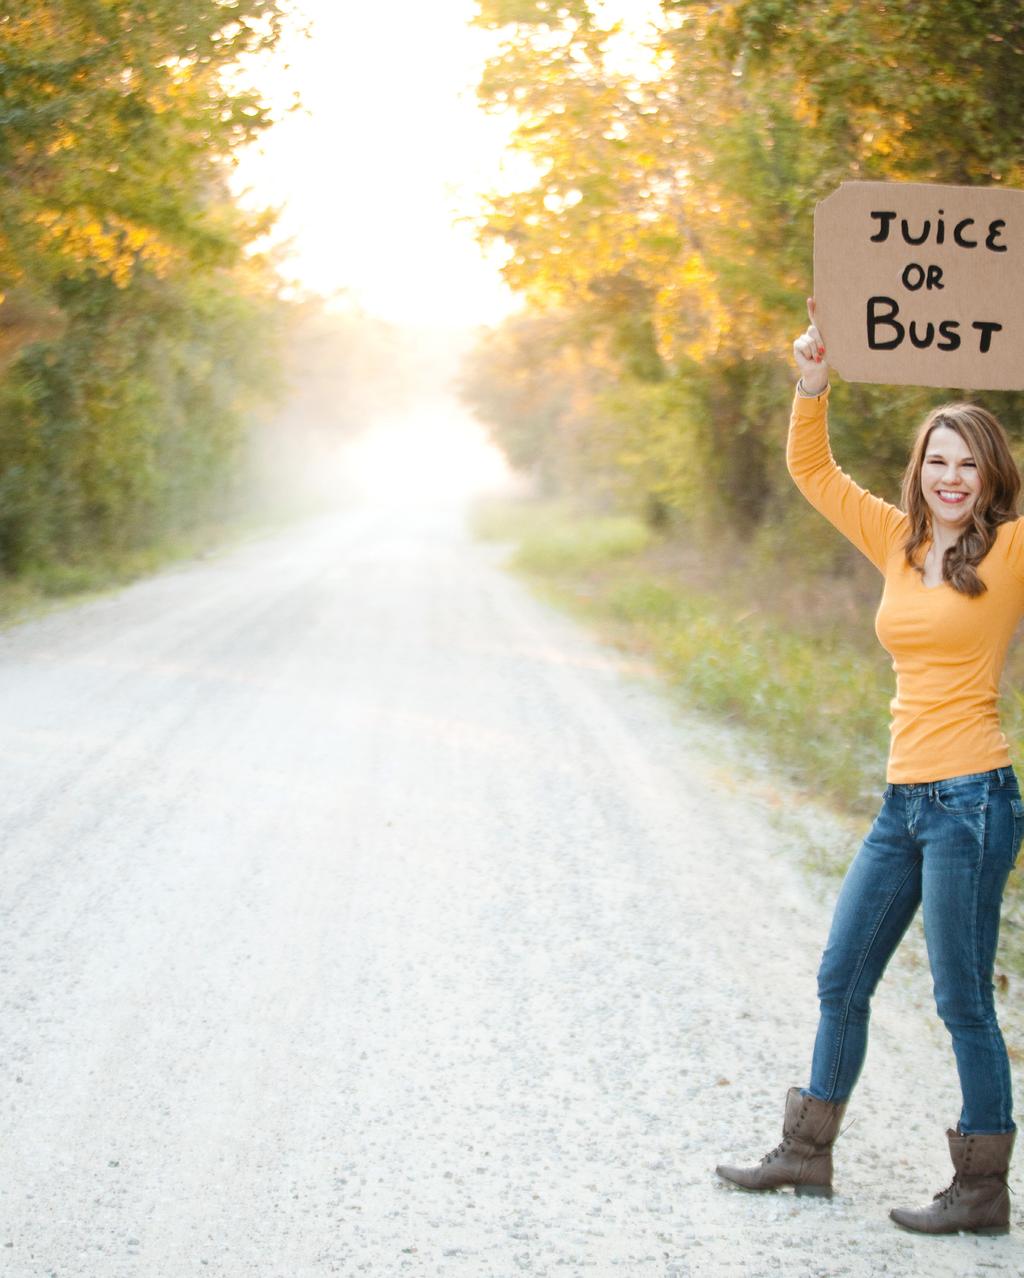 The Juice on All About Juicing All About Juicing will help you juice your way to radical wellness through a straw.